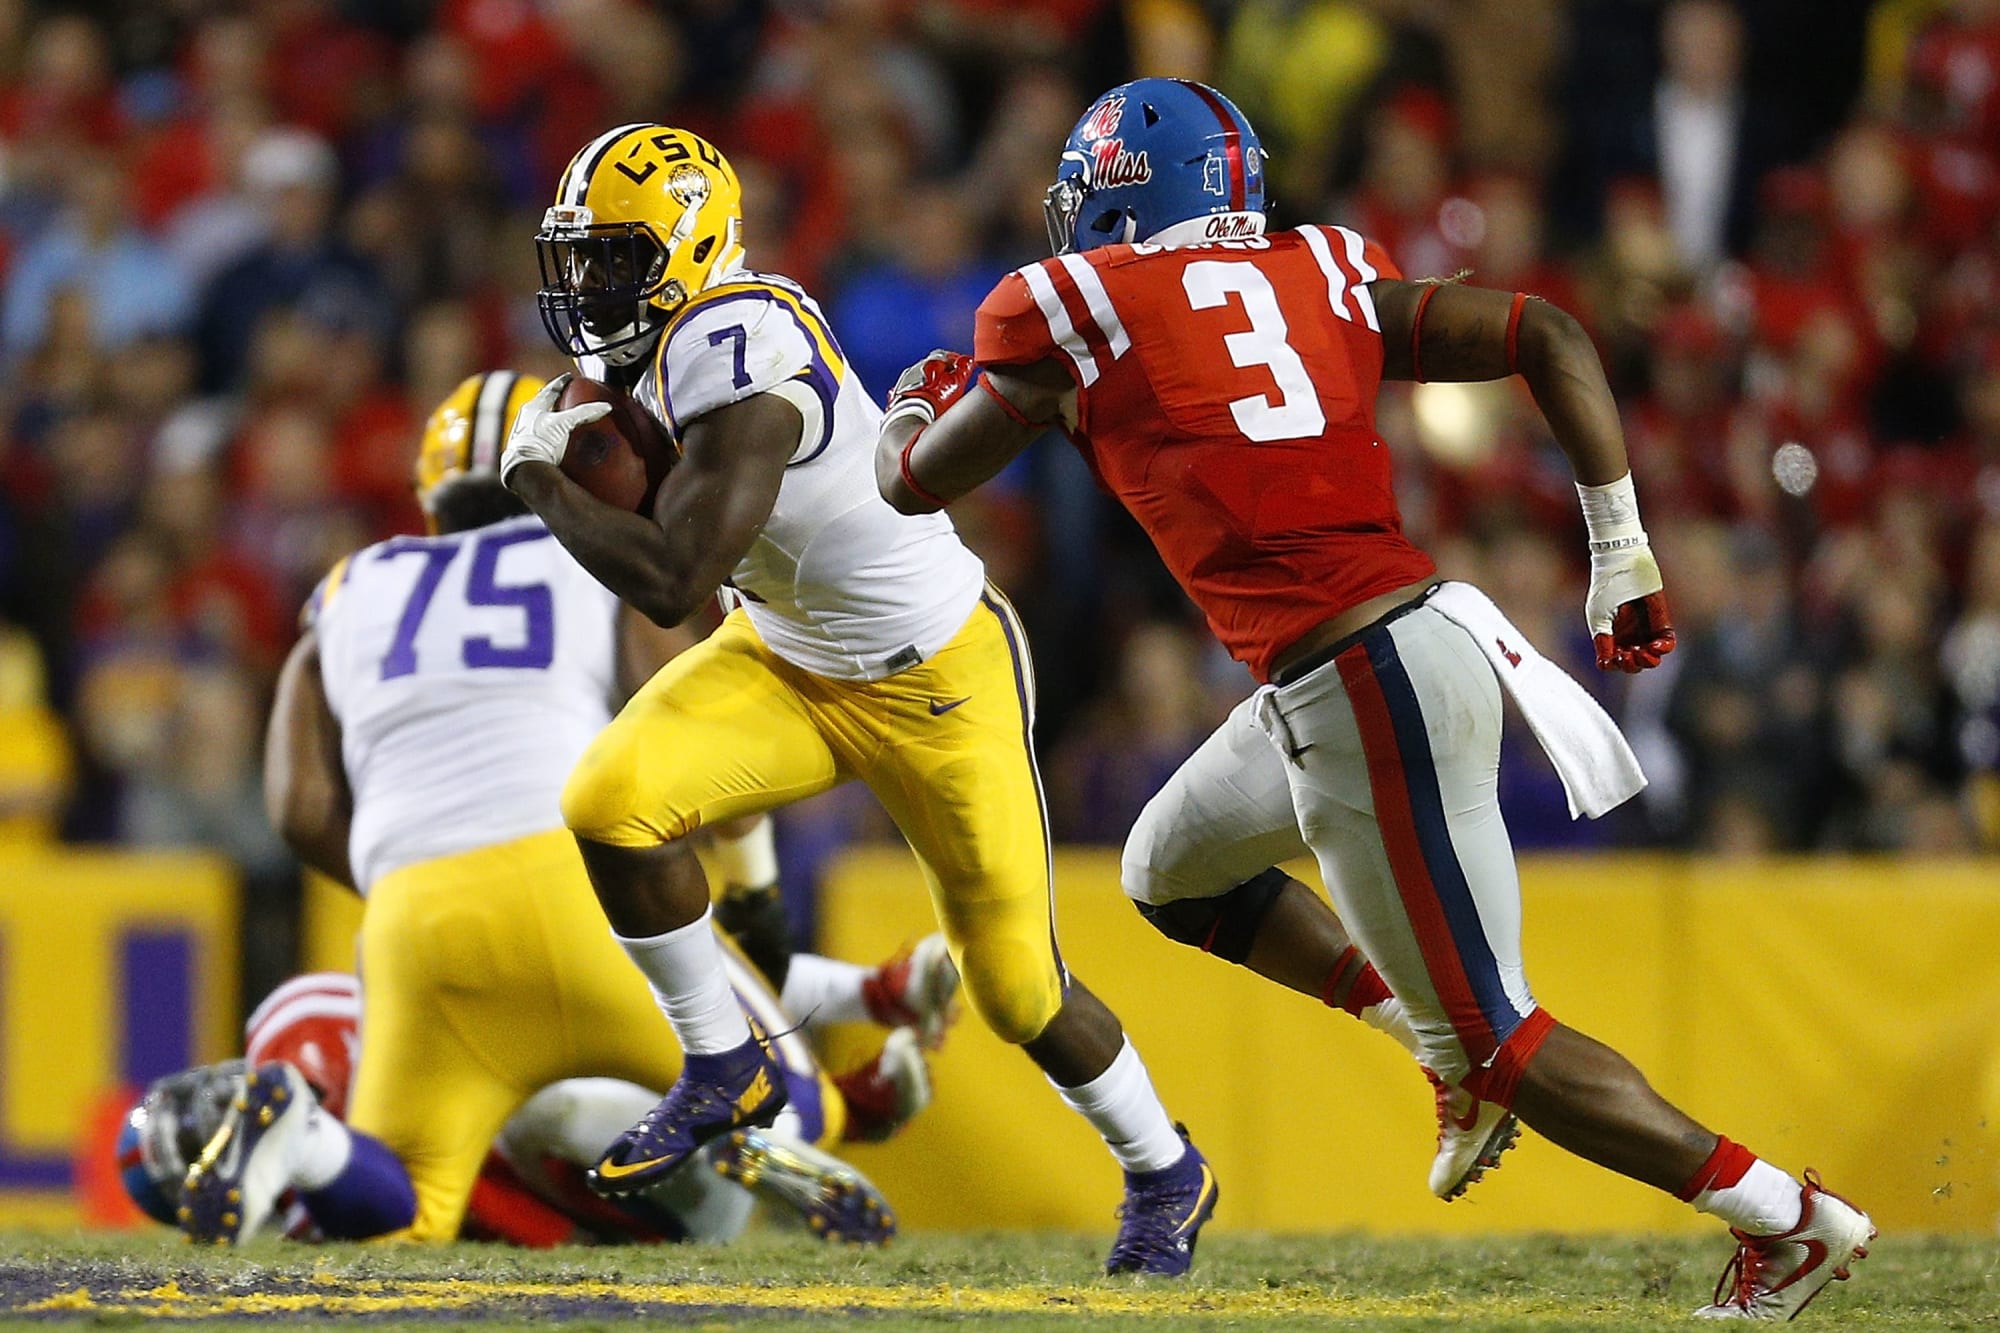 LSU vs. Ole Miss live stream How to watch online